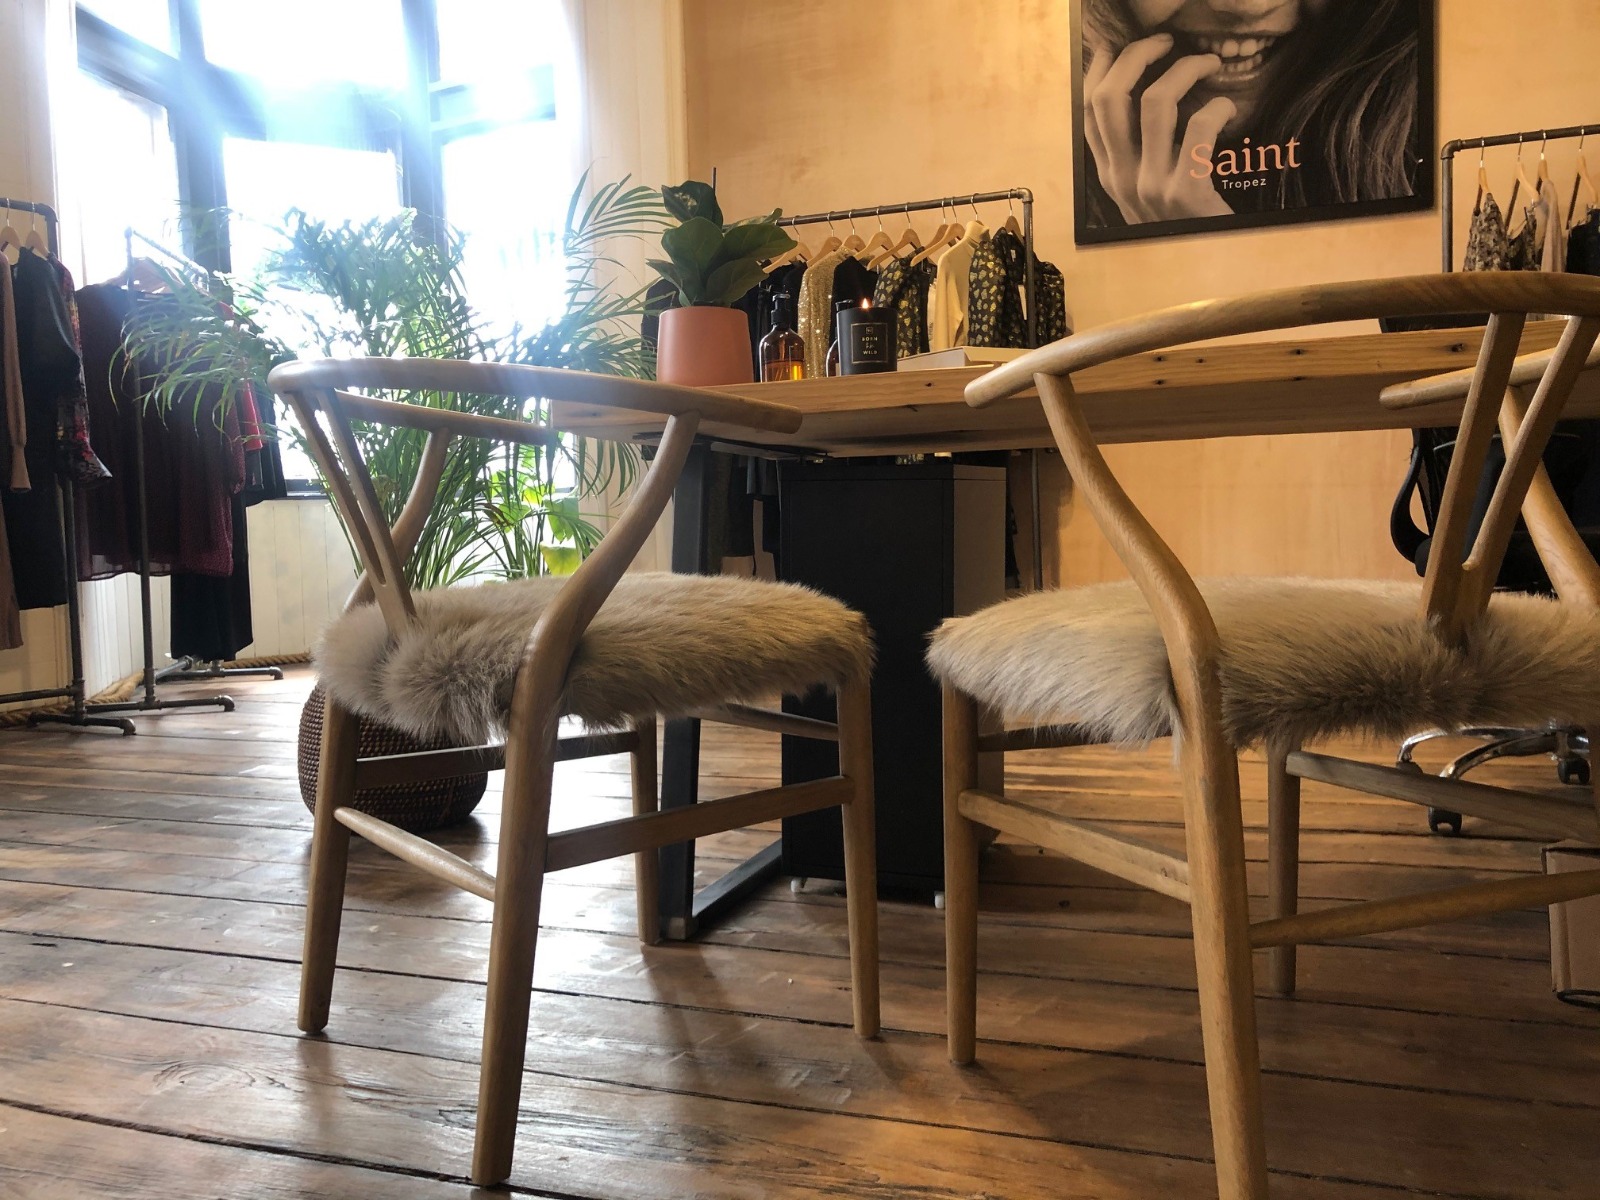 There's always room for our Wishbone Chairs! They're such a popular option.